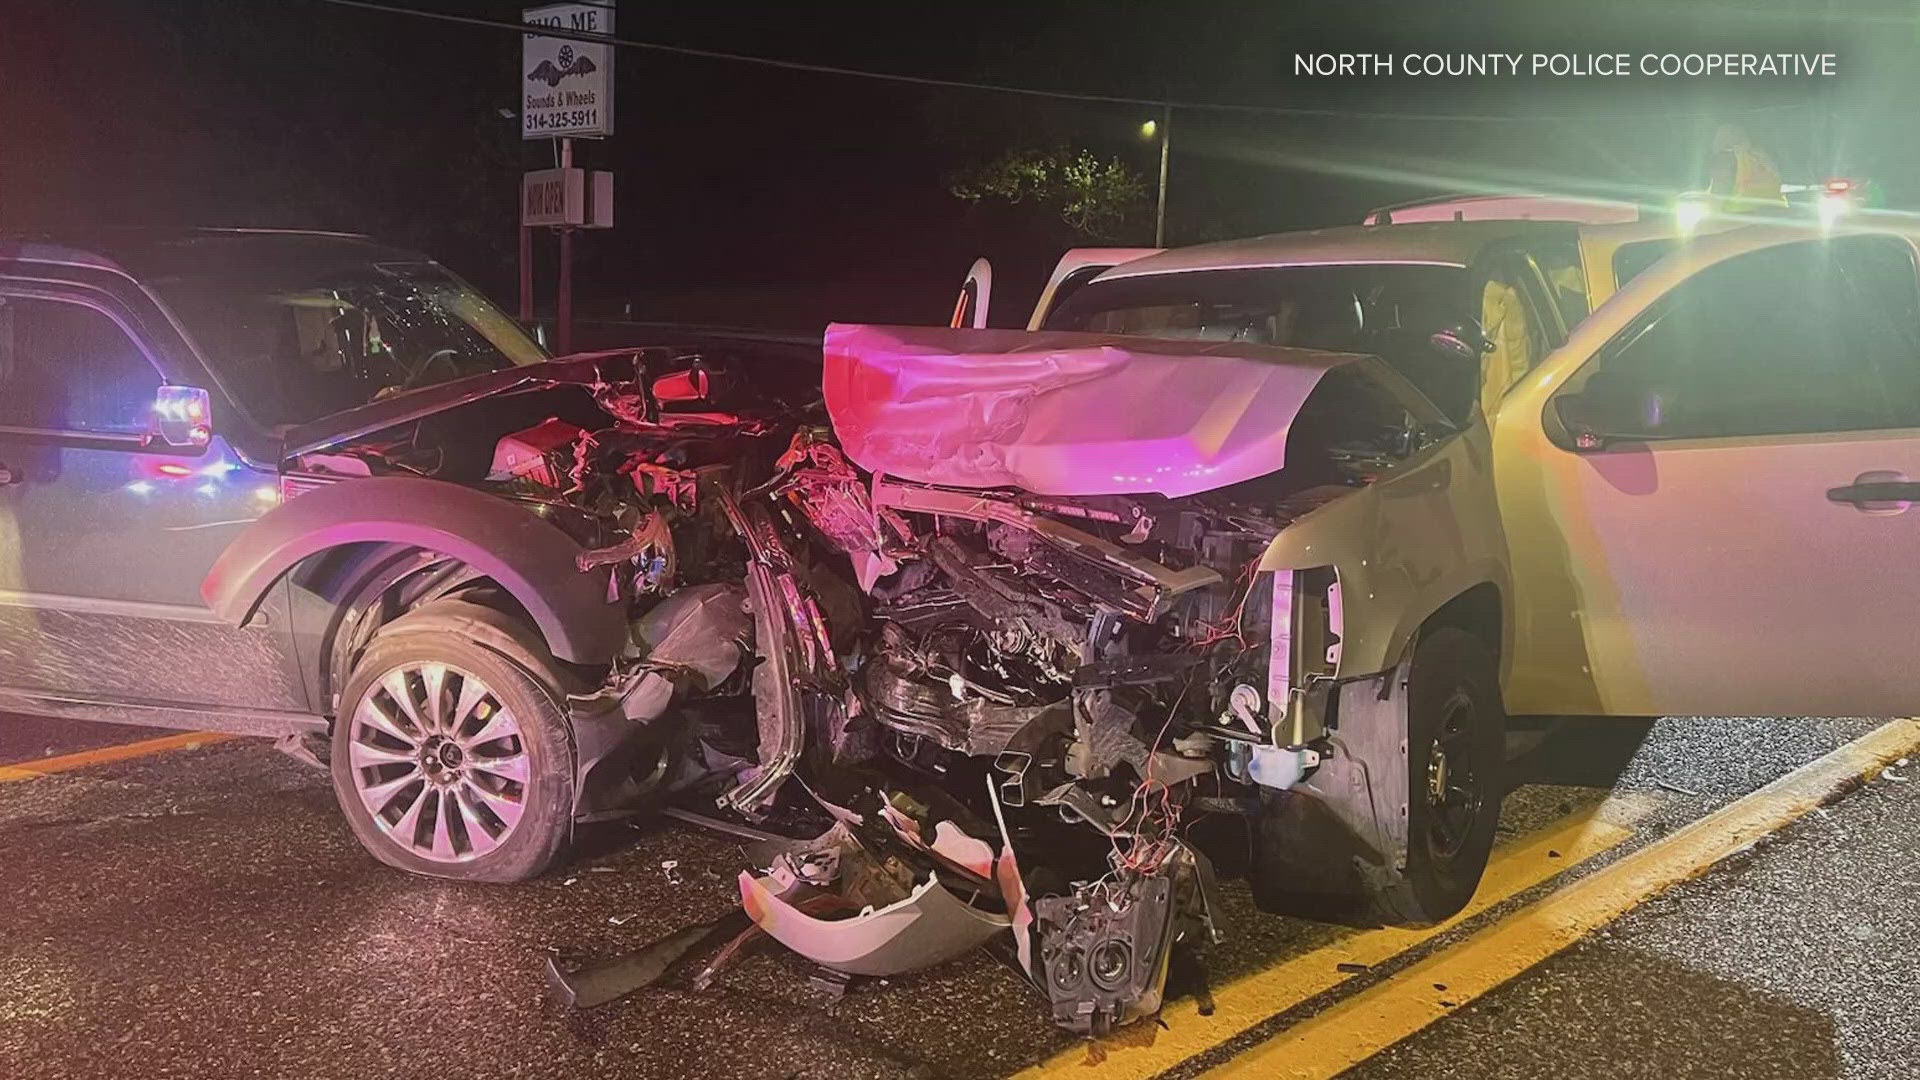 Two officers with the North County Police Cooperative and another driver were injured after colliding head-on. It happened at about 2:30 a.m. Thursday.